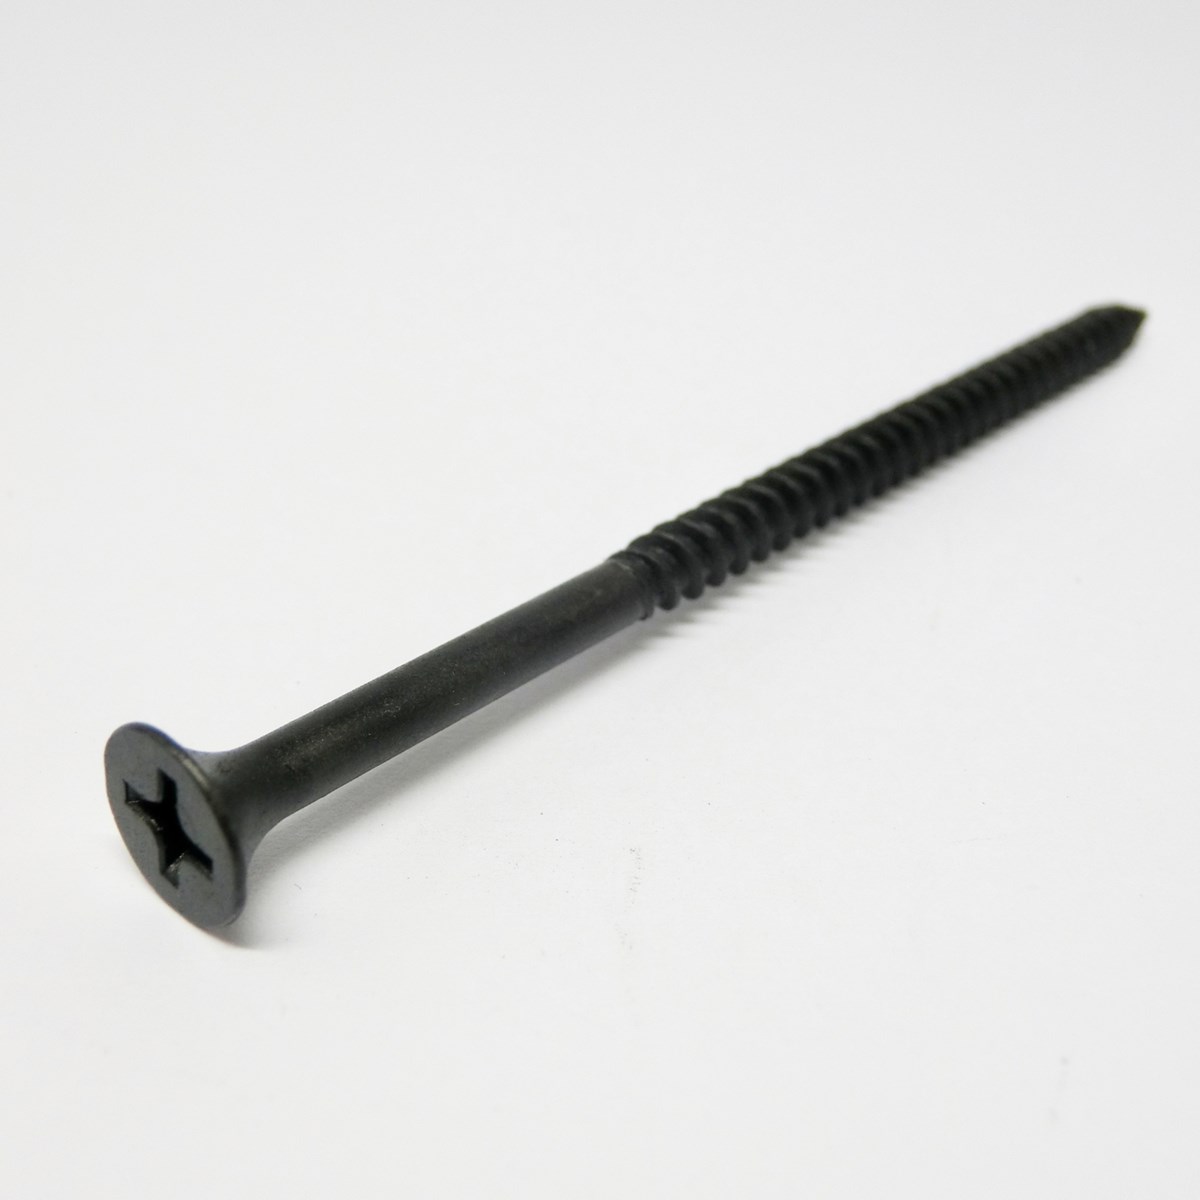 ACE 100124ACE Screw, #8 Thread, 3 in L, Fine Thread, Bugle Head, Phillips Drive, Sharp Point, Steel, Black Phosphate - 1